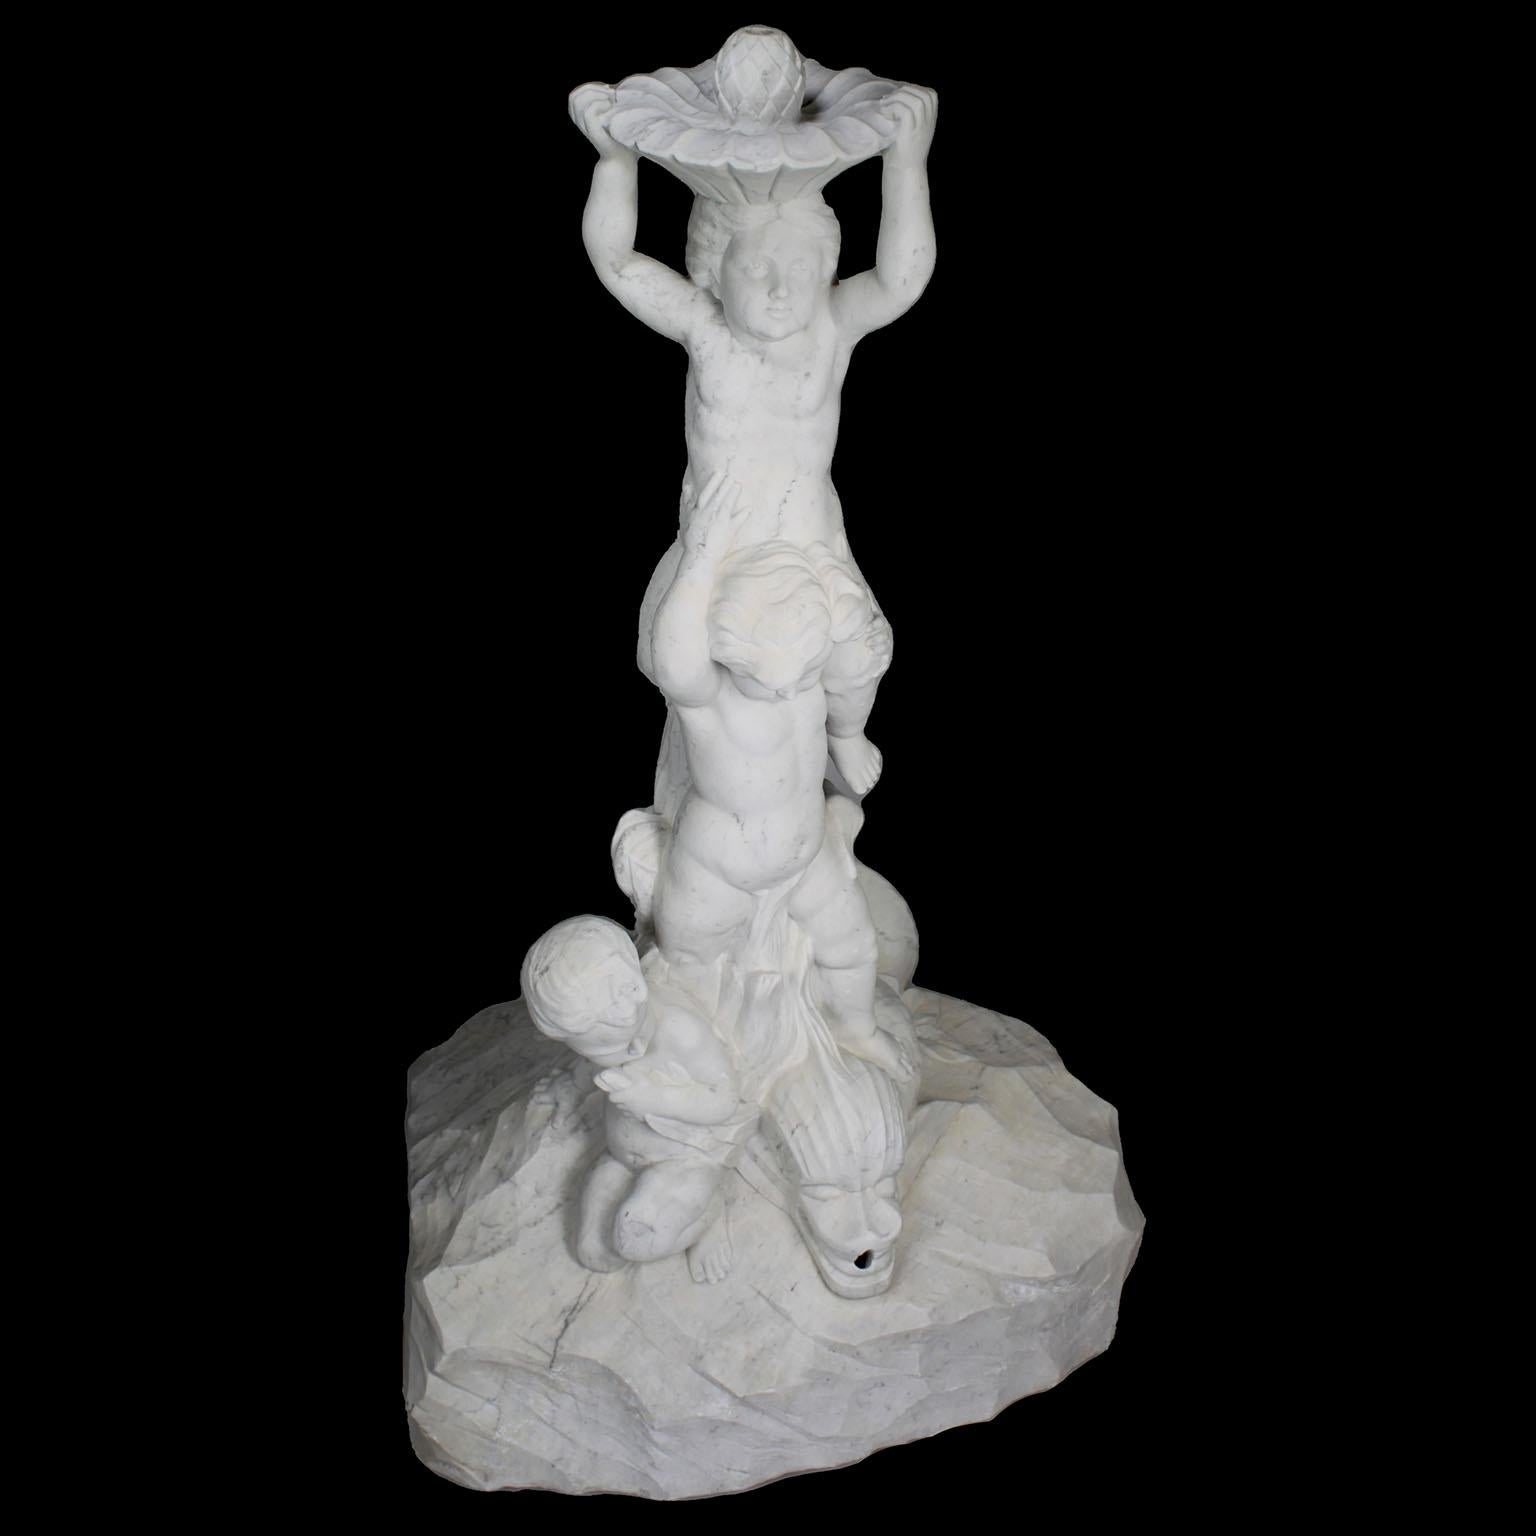 A Charming Whimsical Italian 19th/20th Century Carved Marble Figural Fountain depicting three playful Putti riding a Koi Fish. Circa: Florence 1900.

Step into a realm of enchantment and artistry with this exquisite Charming Whimsical Italian Carved